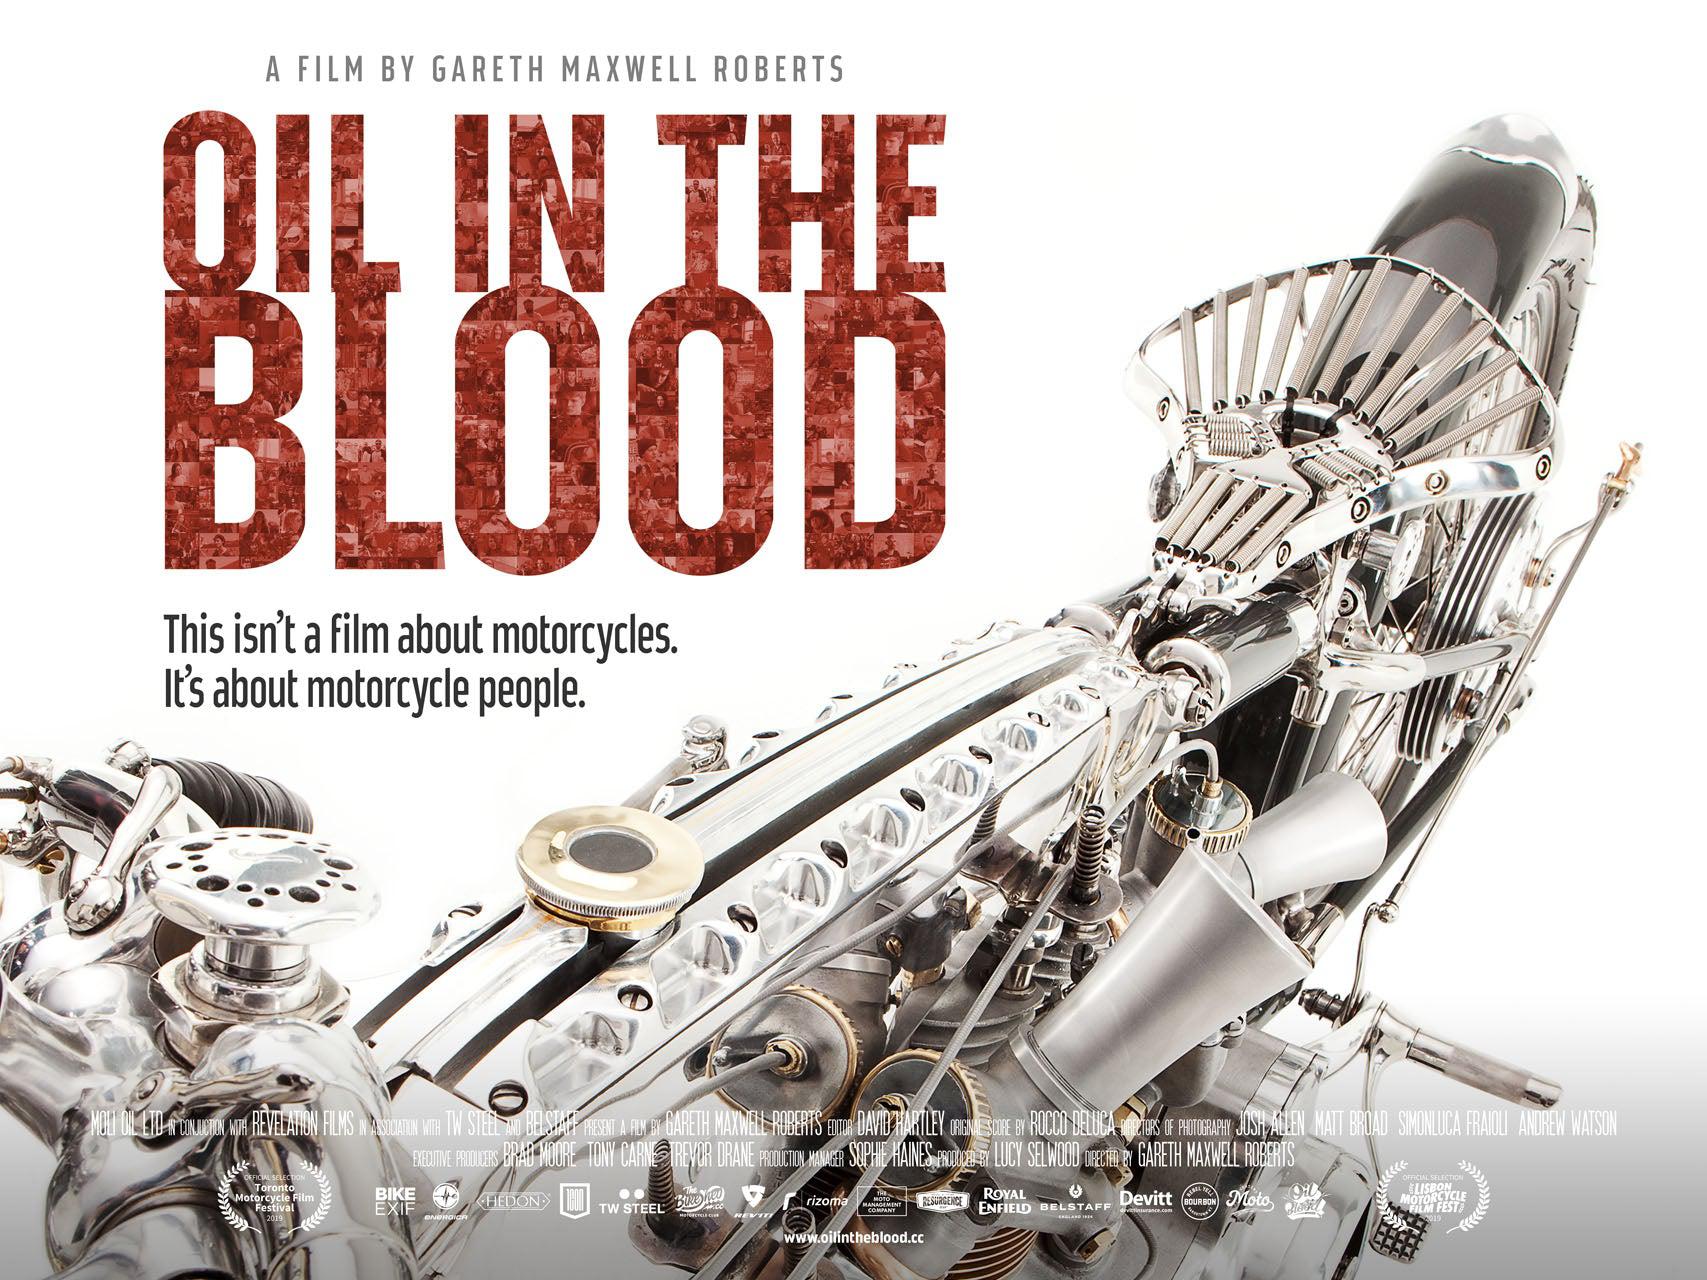 Oil in the Blood poster